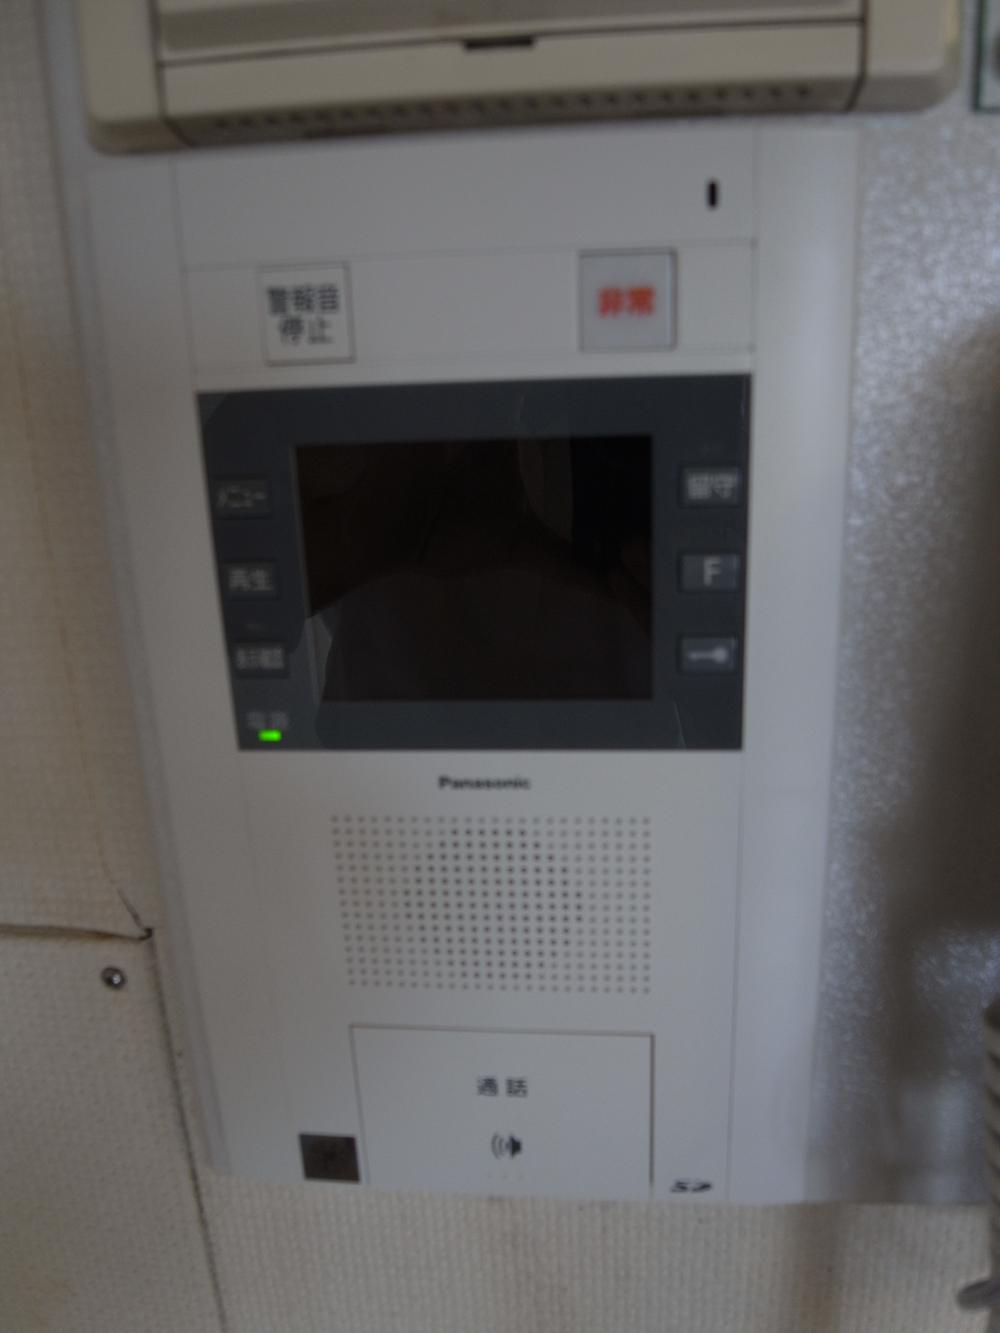 Other common areas. Common areas: intercom with monitor